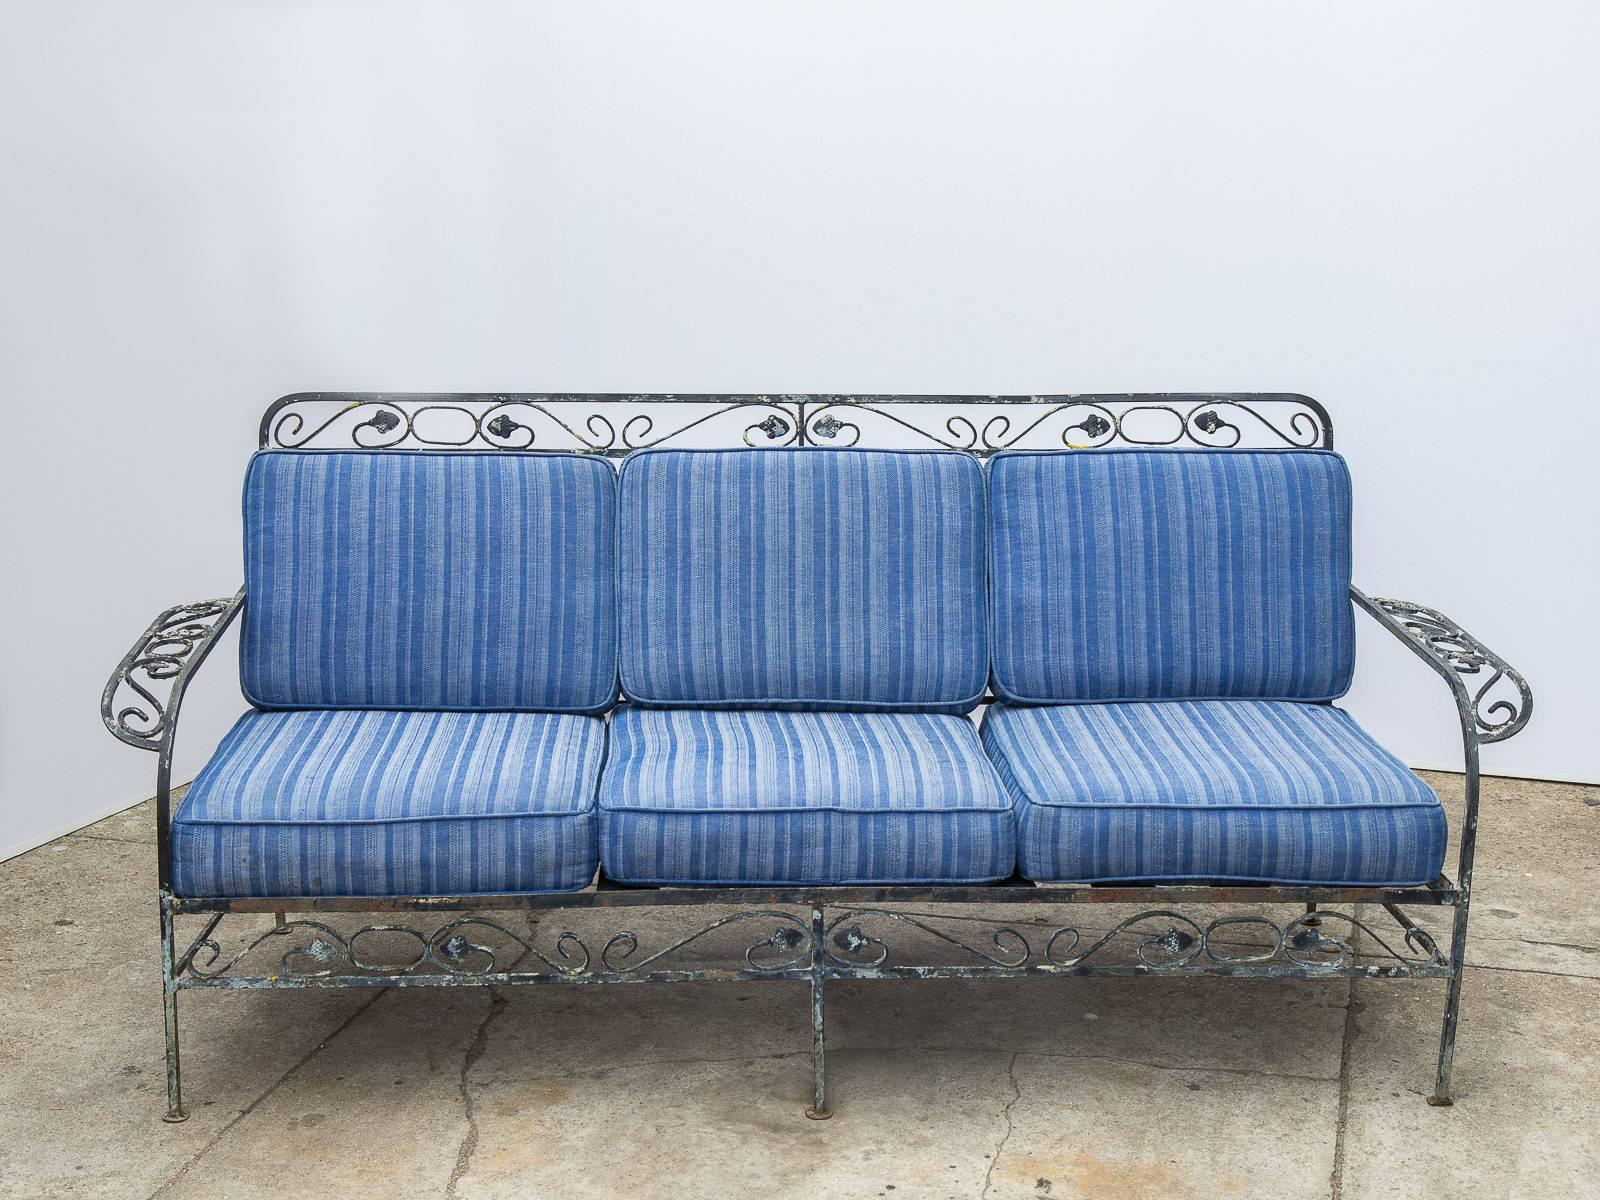 Vintage Salterini patio sofa and armchairs. This is where cabin-modern meets the English country. Capri blue-striped upholstery is from the 1970s, and has a nice age-appropriate wear. Serviceable upon request. Cushions are sturdy and robust due to